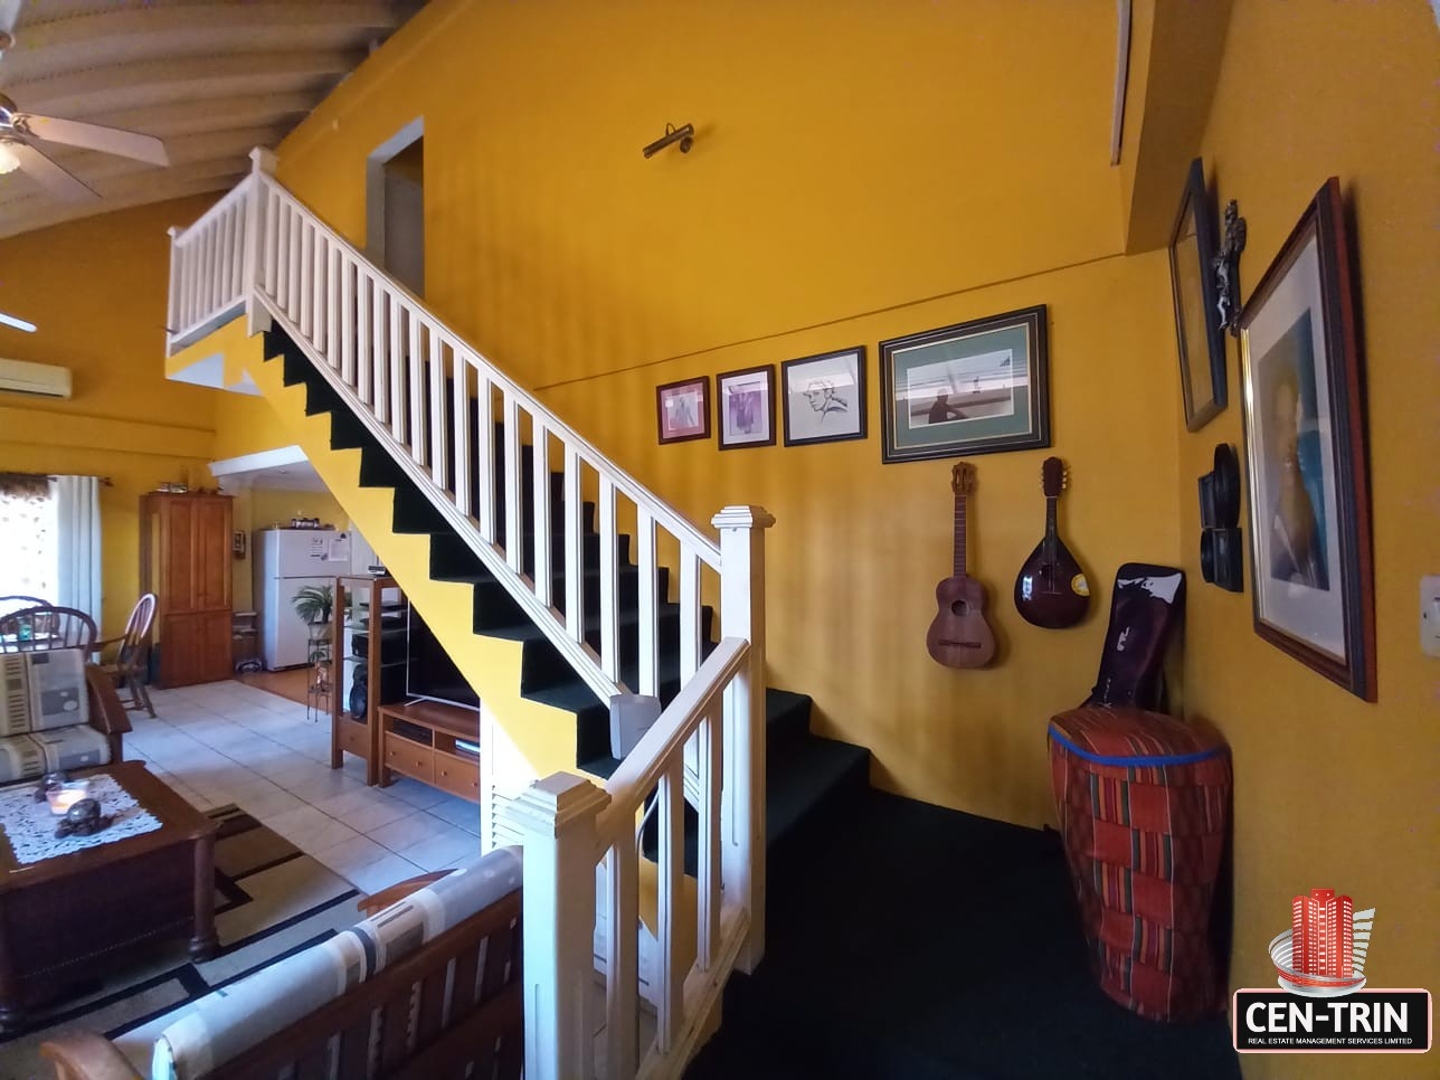 A living room with a staircase leading up to a second floor and two guitars hanging on the wall.